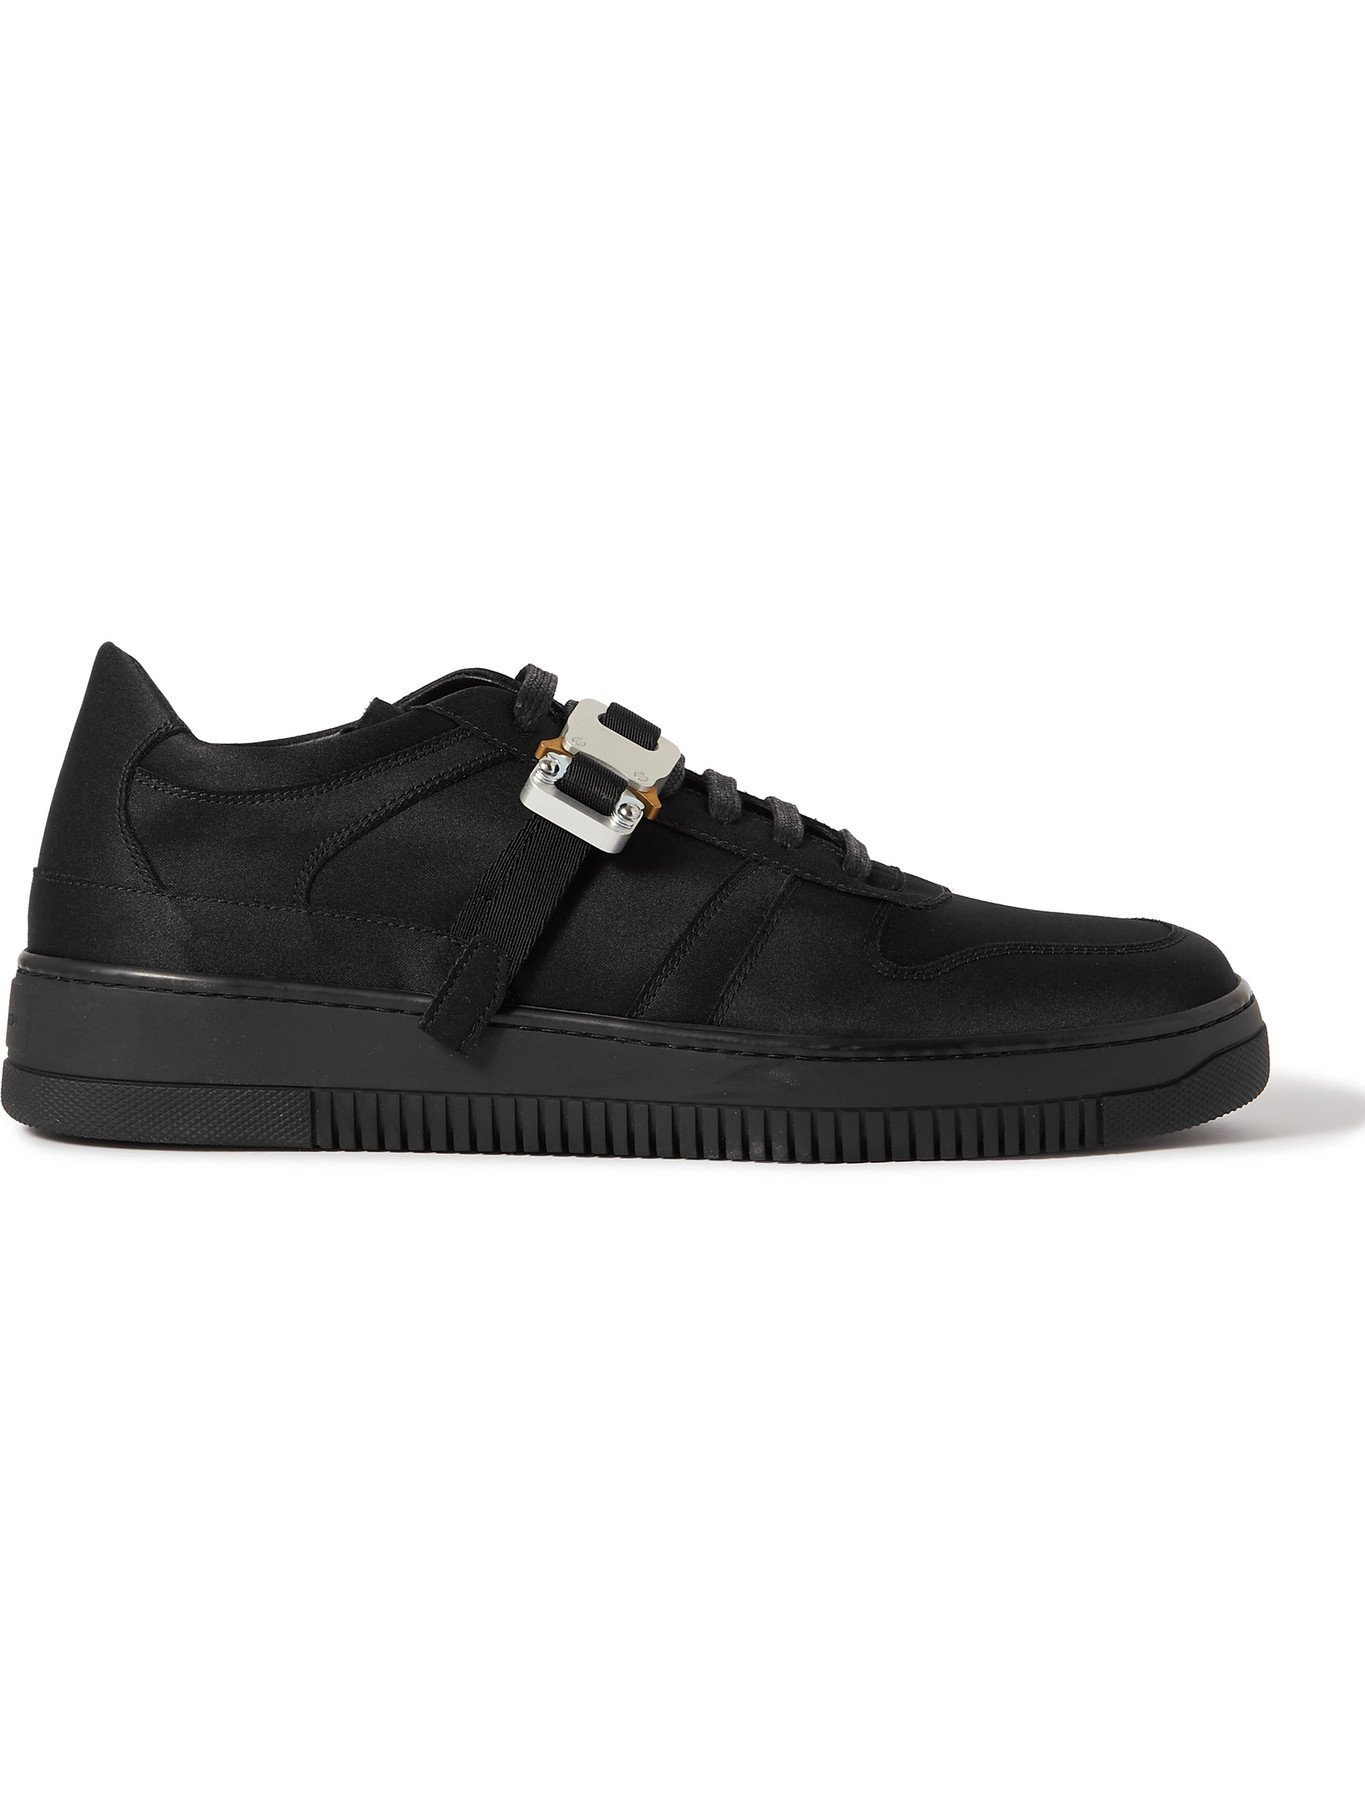 Photo: 1017 ALYX 9SM - Buckle-Embellished Satin Sneakers - Black